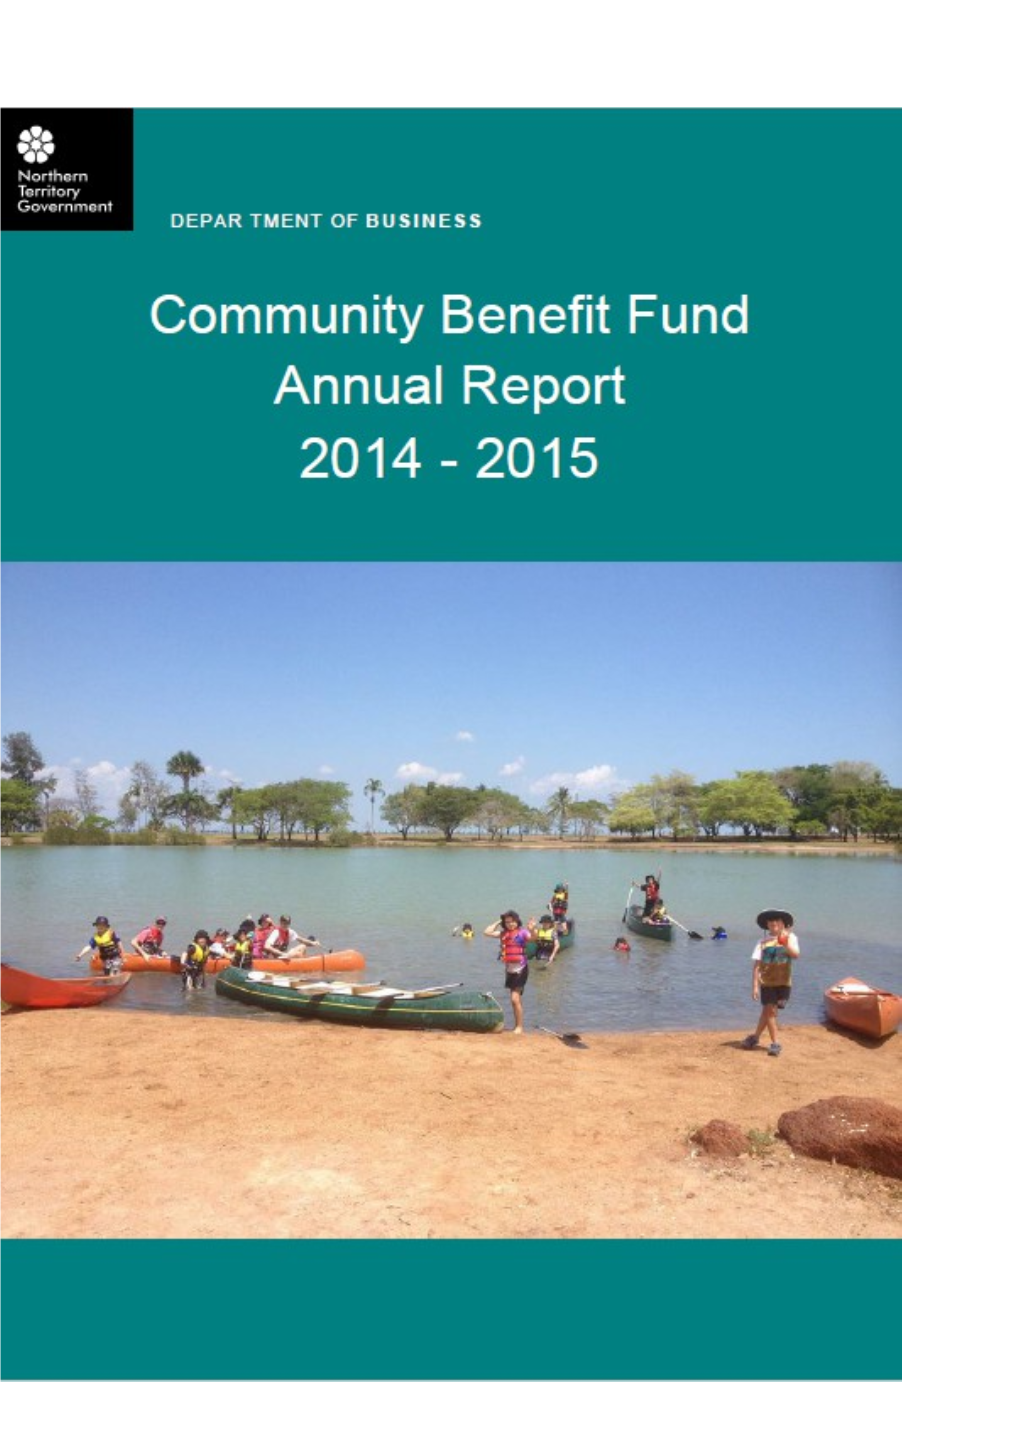 05 Community Benefit Fund Annual Report 2014-15